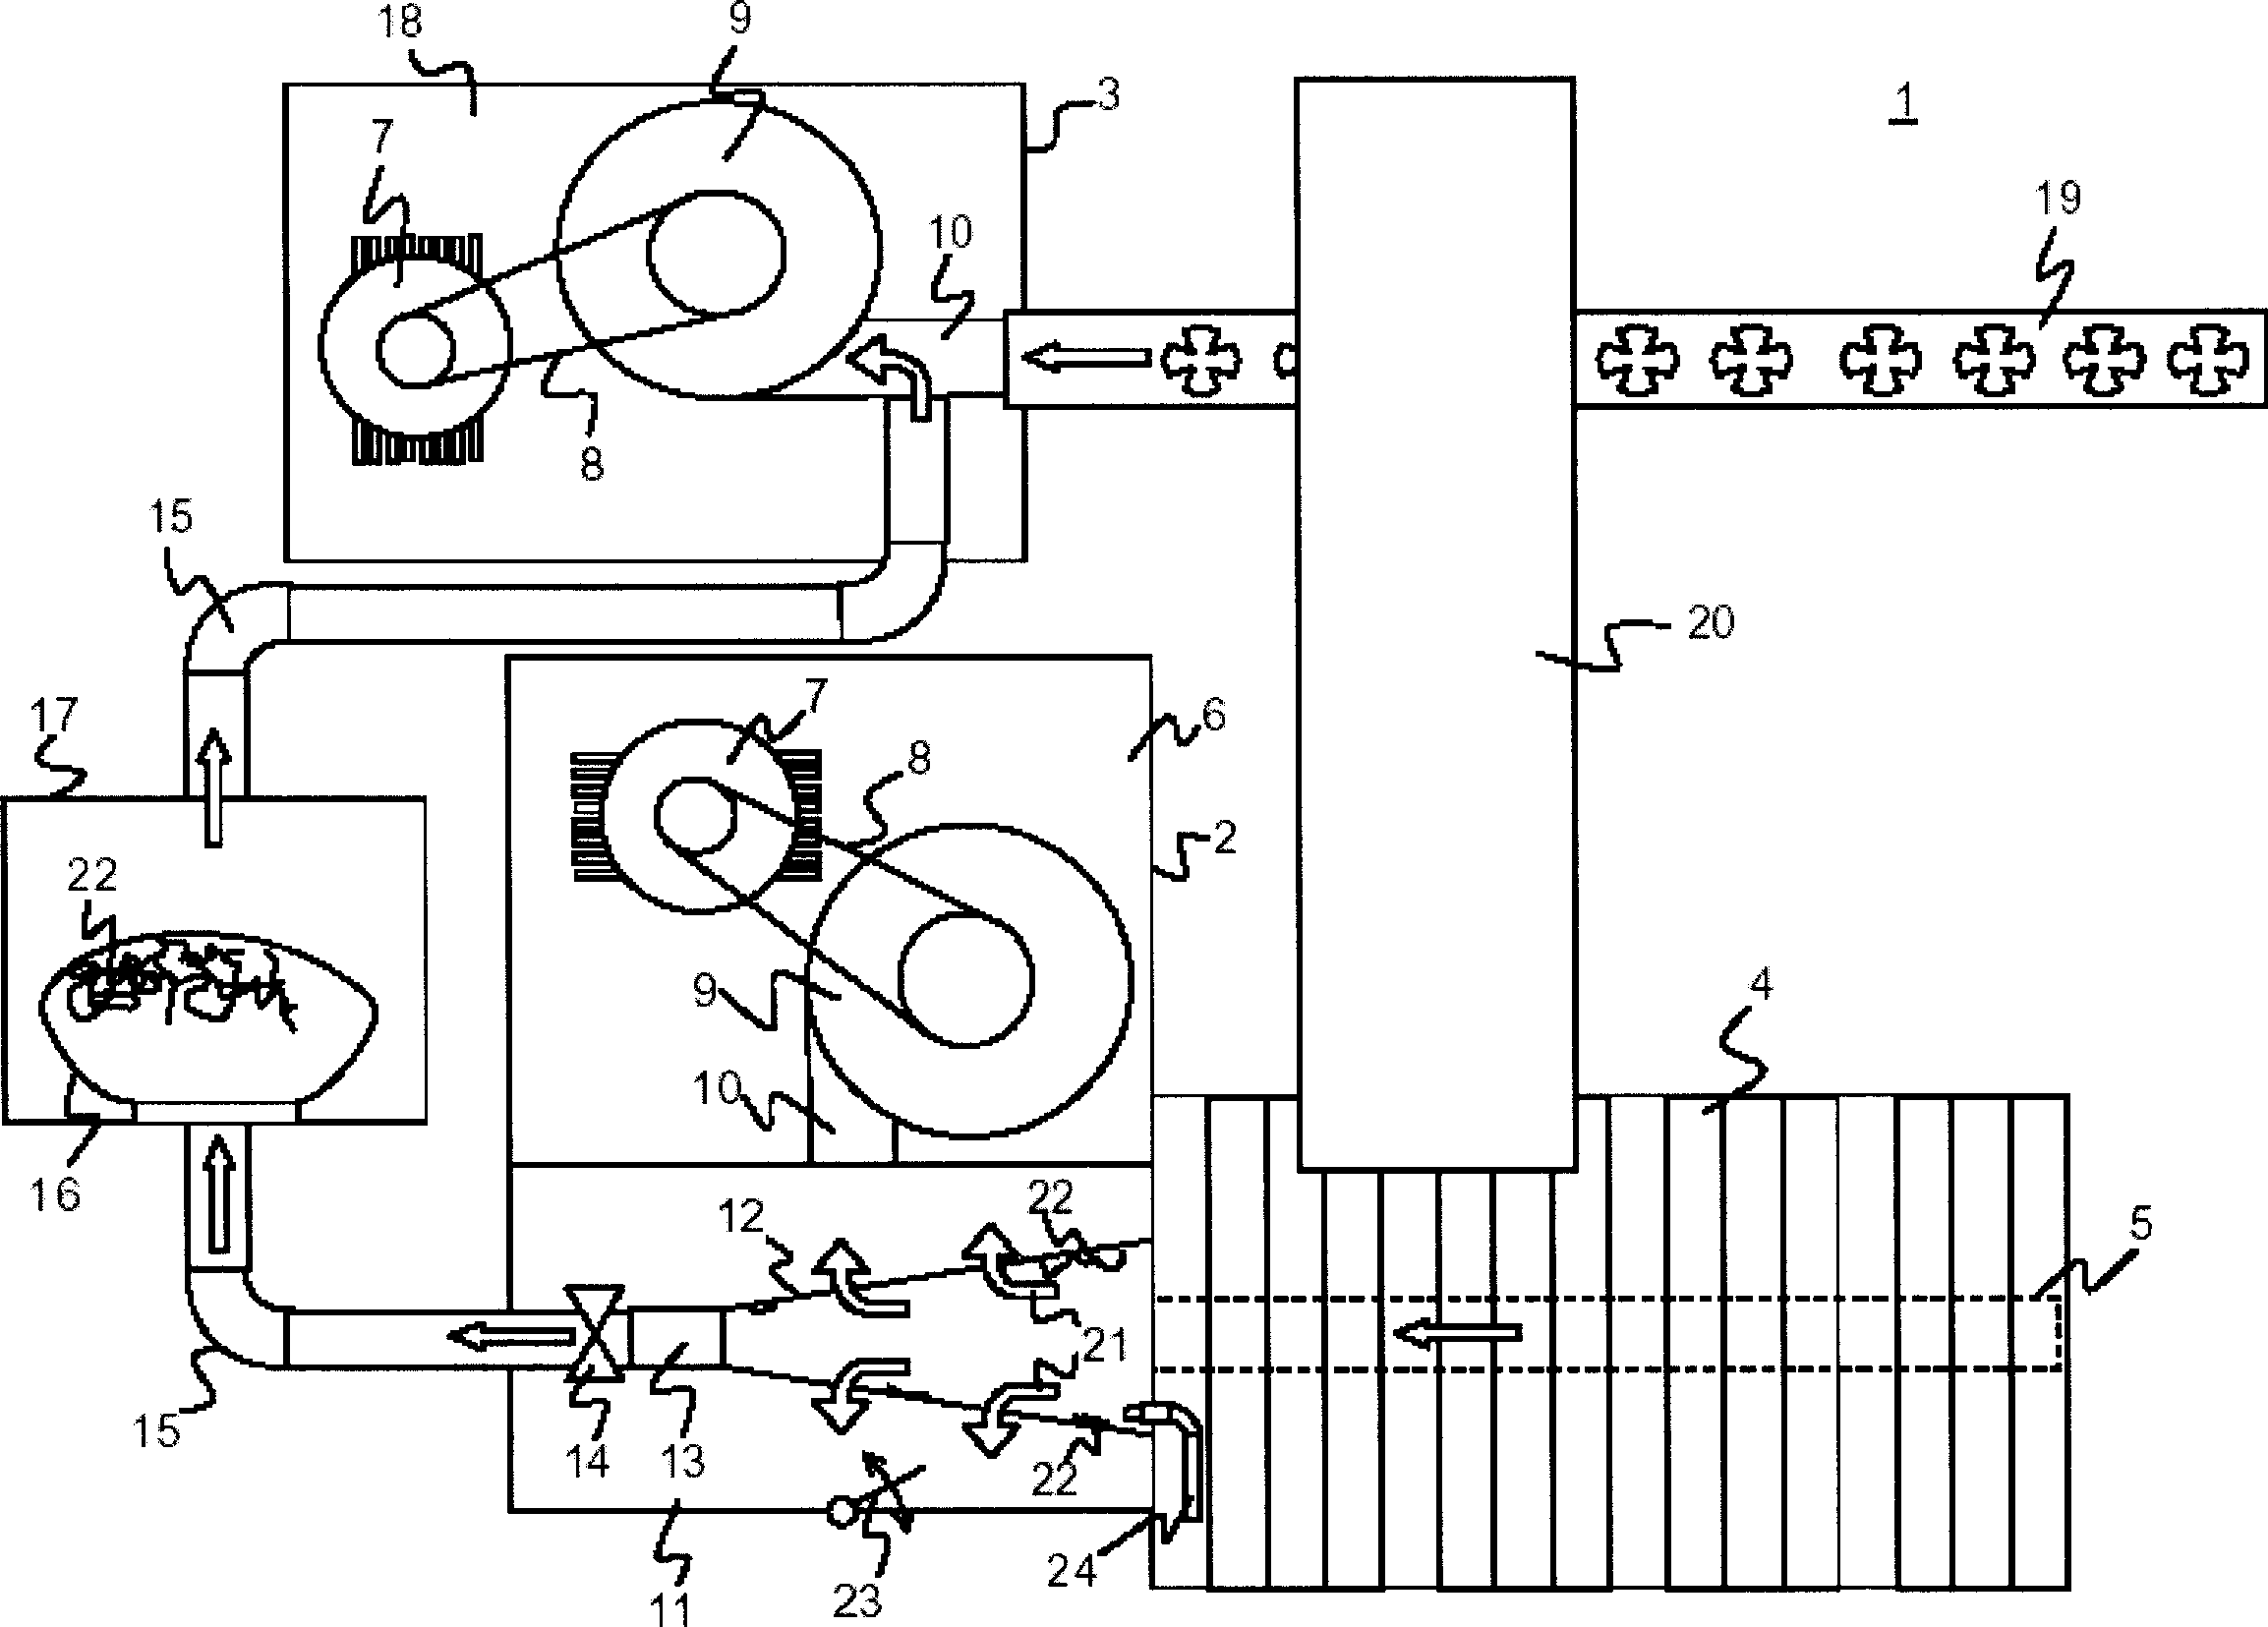 Textile machinery with air flow delivery unit and filtering unit